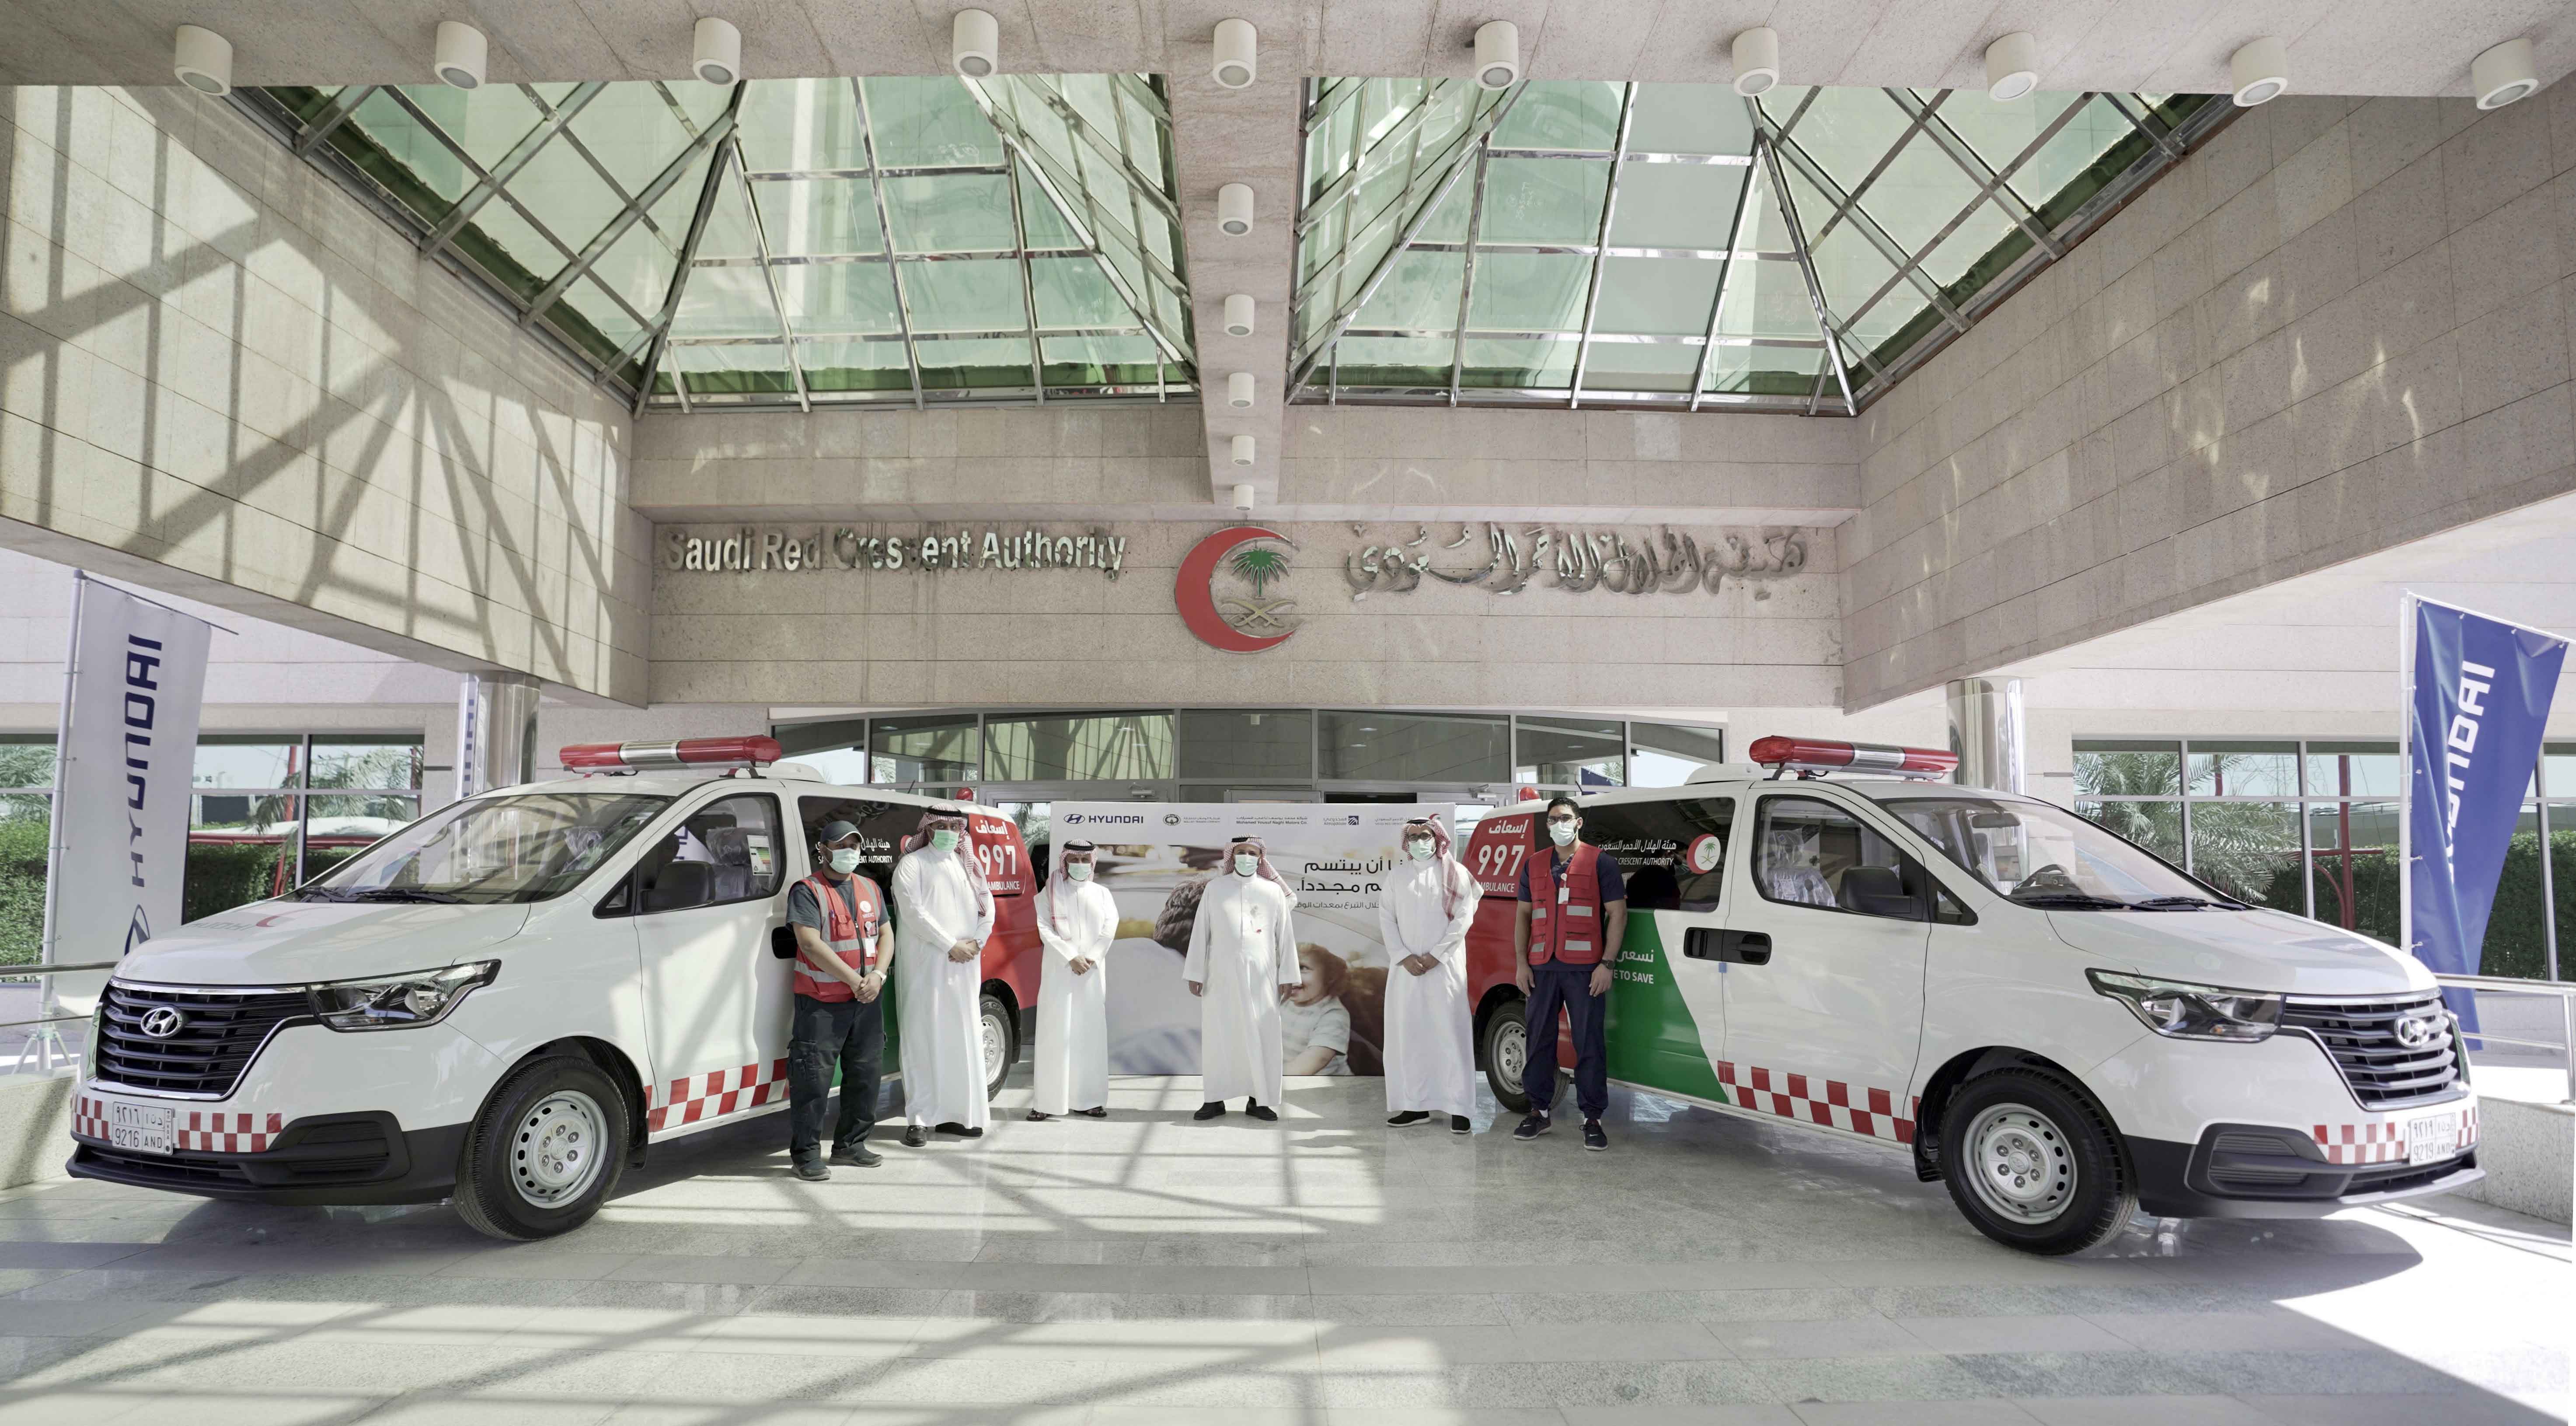 Hyundai donates 24 vehicles to Saudi Red Crescent Authority in Saudi Arabia to help in the fight against COVID-19